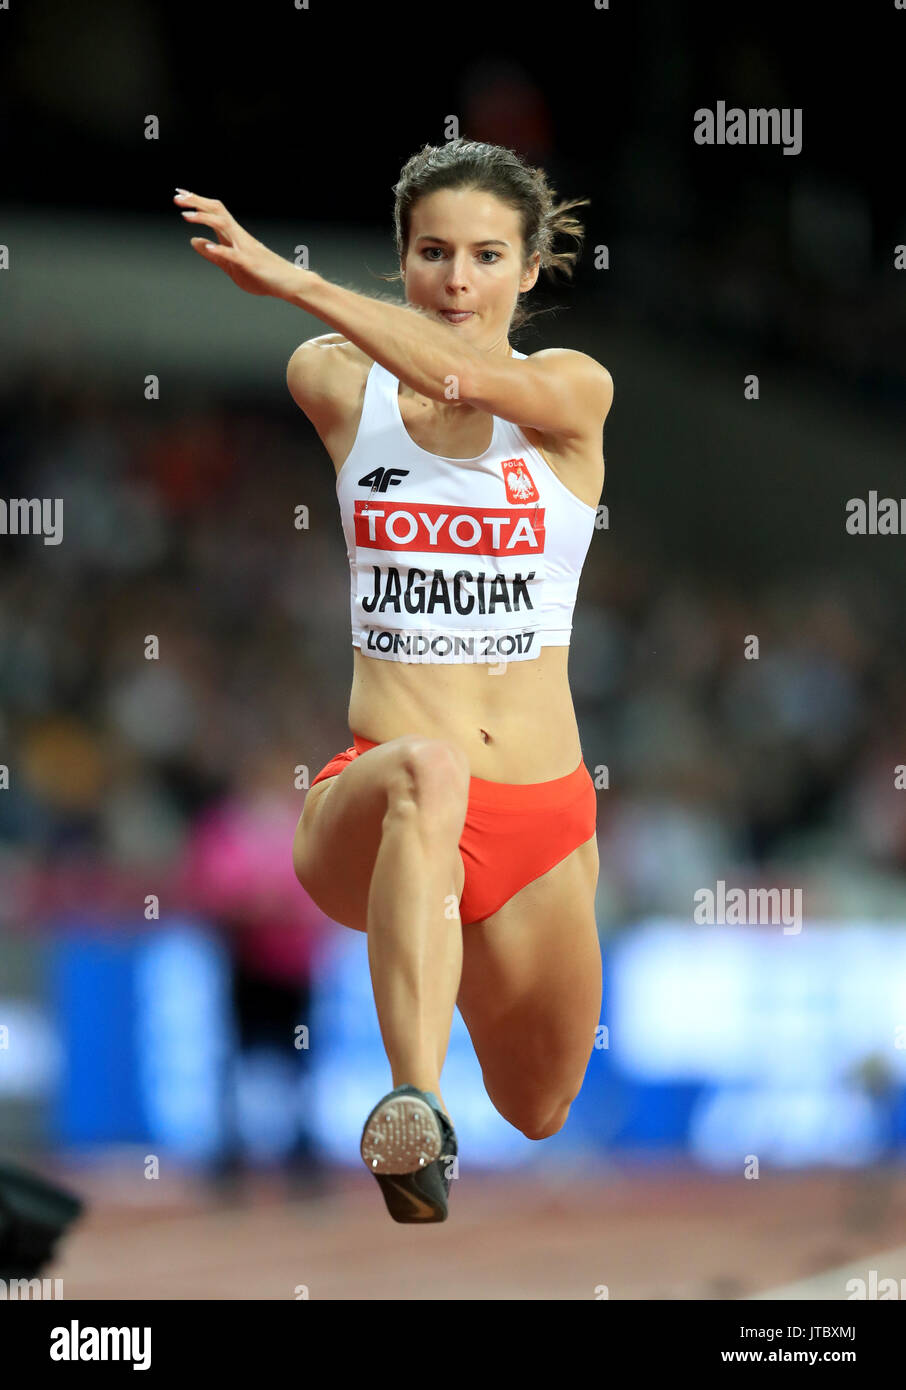 Poland's Anna Jagaciak in action during the Women's Triple Jump final during day four of the 2017 IAAF World Championships at the London Stadium. PRESS ASSOCIATION Photo. Picture date: Monday August 7, 2017. See PA story ATHLETICS World. Photo credit should read: Adam Davy/PA Wire. RESTRICTIONS: Editorial use only. No transmission of sound or moving images and no video simulation Stock Photo